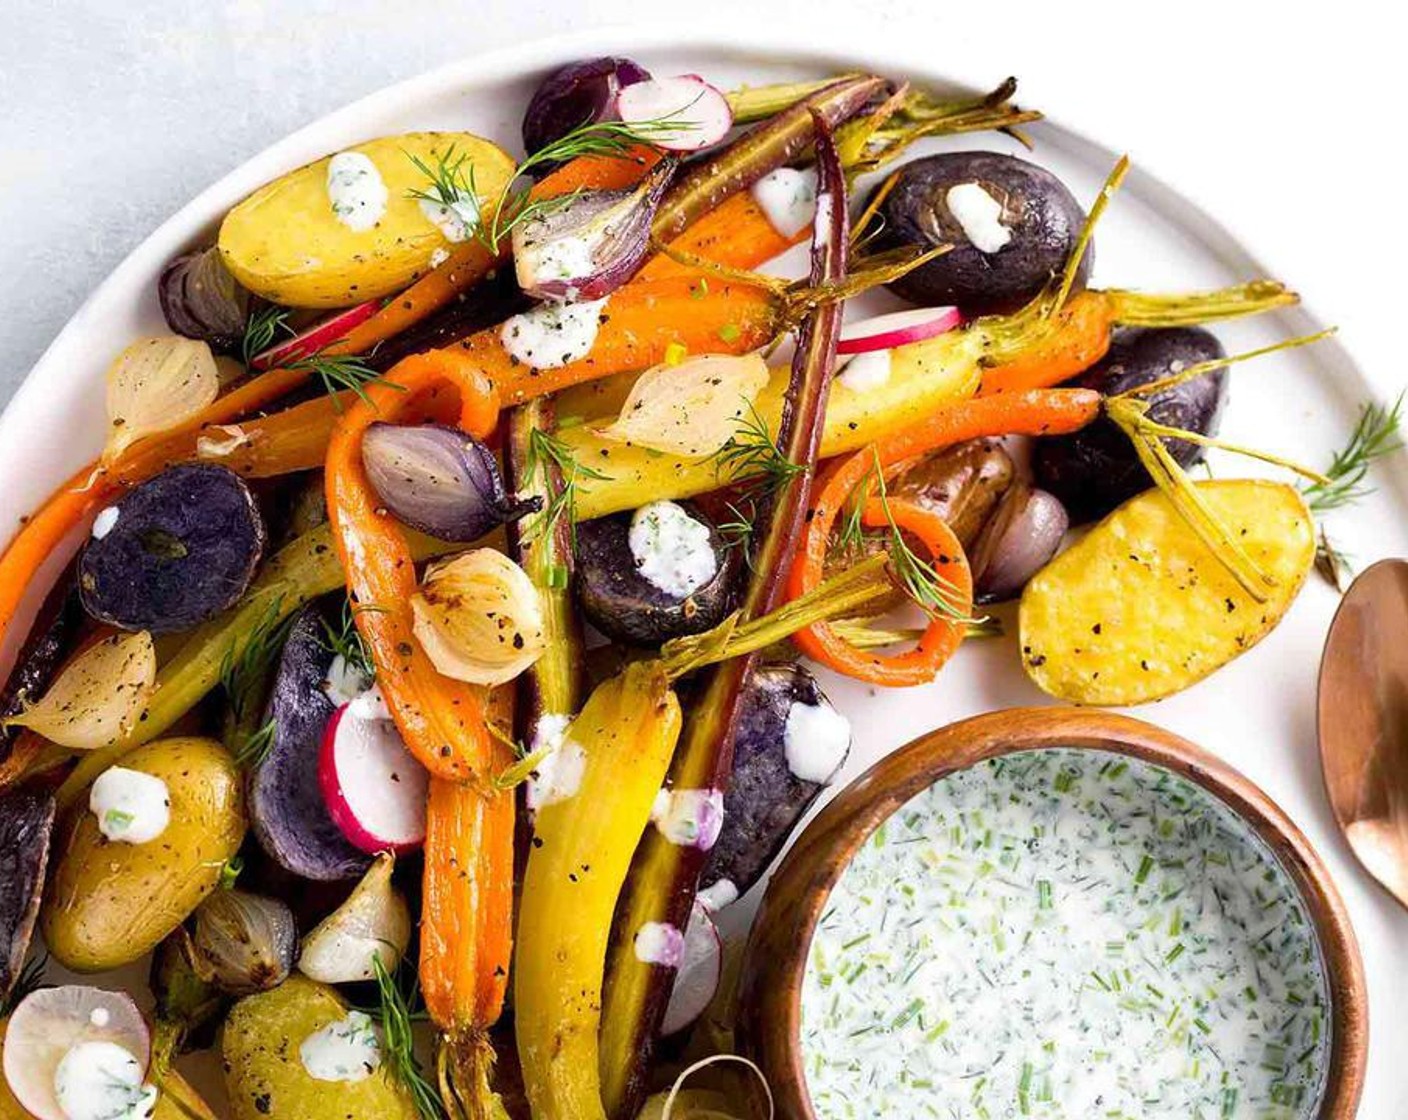 Roasted Root Vegetables with Yogurt Ranch Sauce